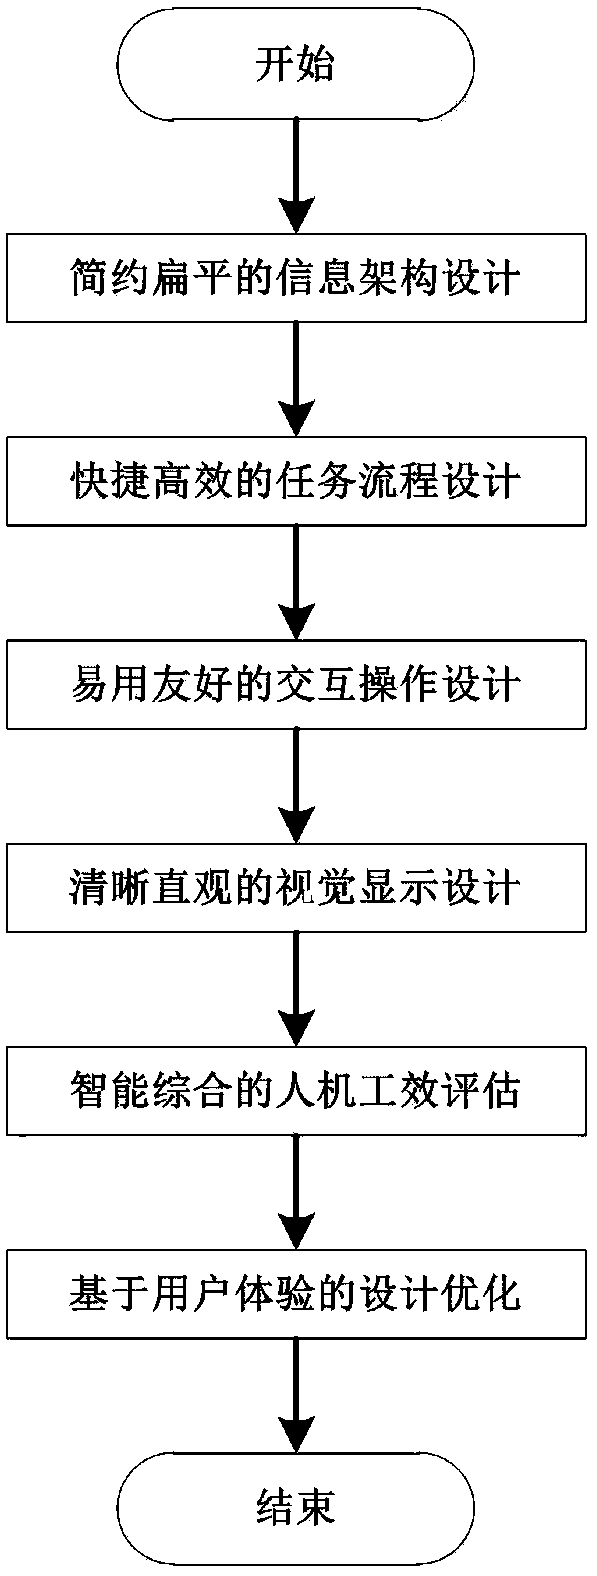 Human-computer interaction design method for touch screen information system